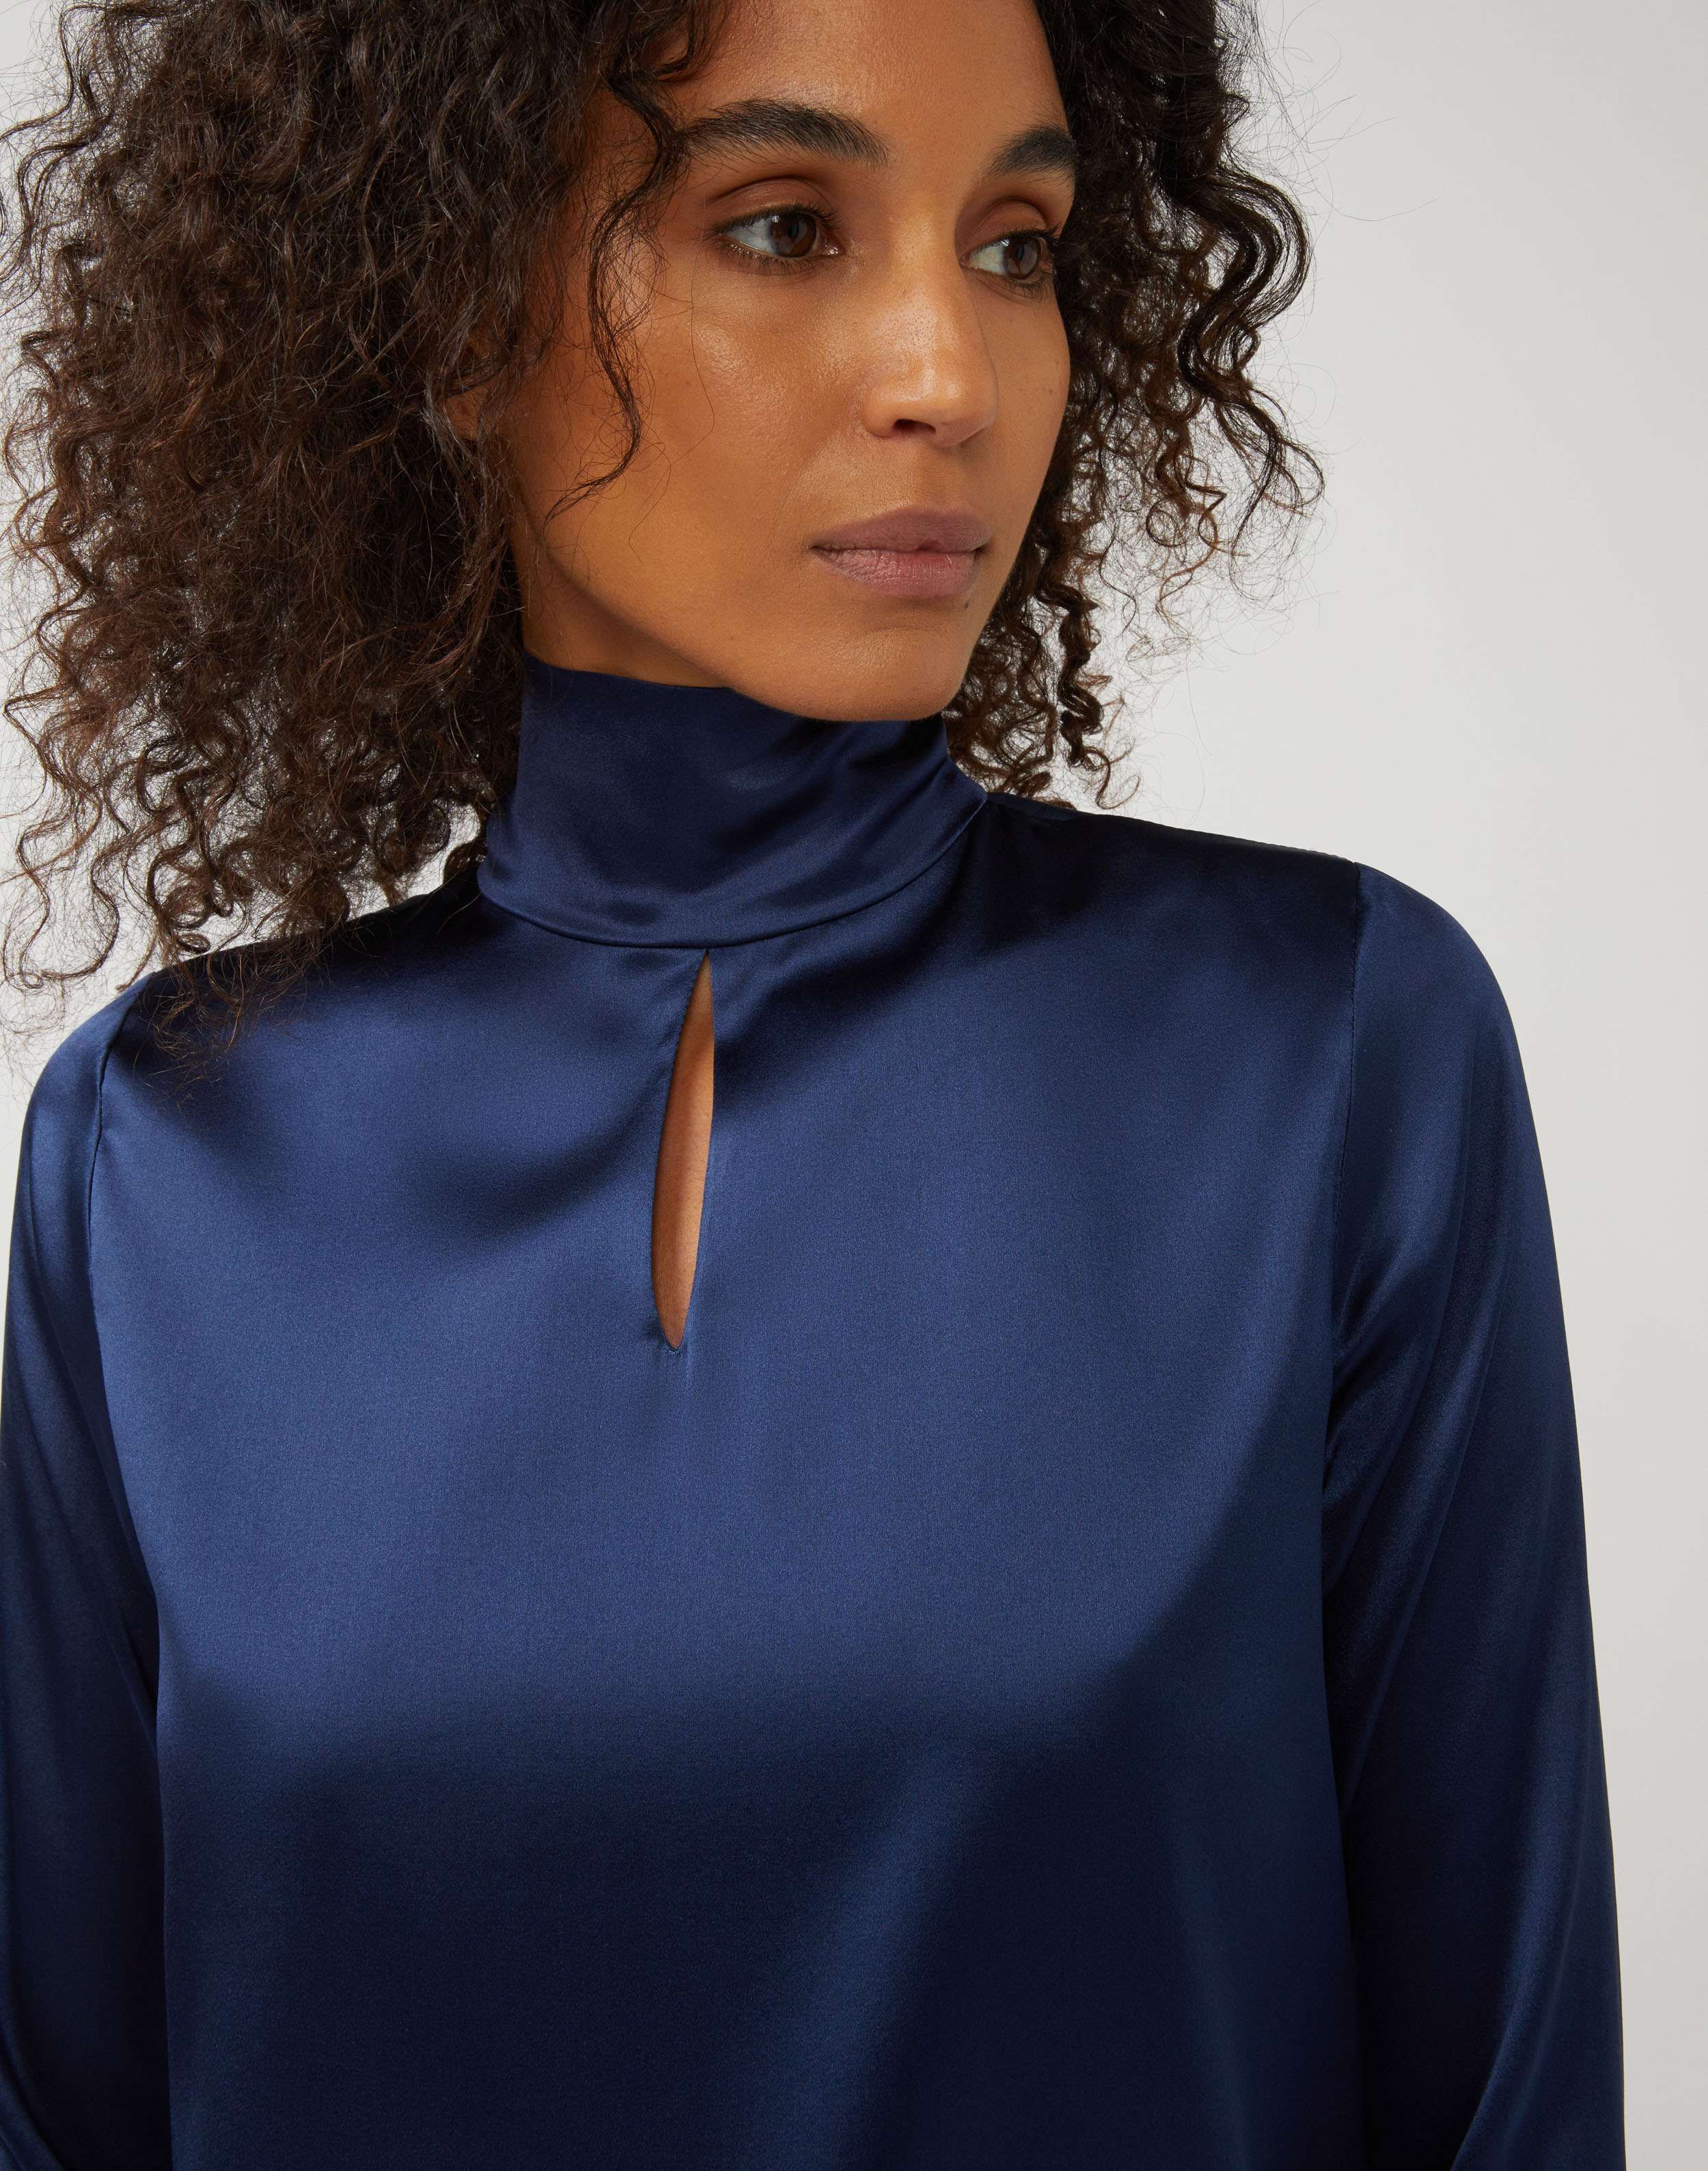 Long-sleeve top in blue stretchy silk satin with bow detail